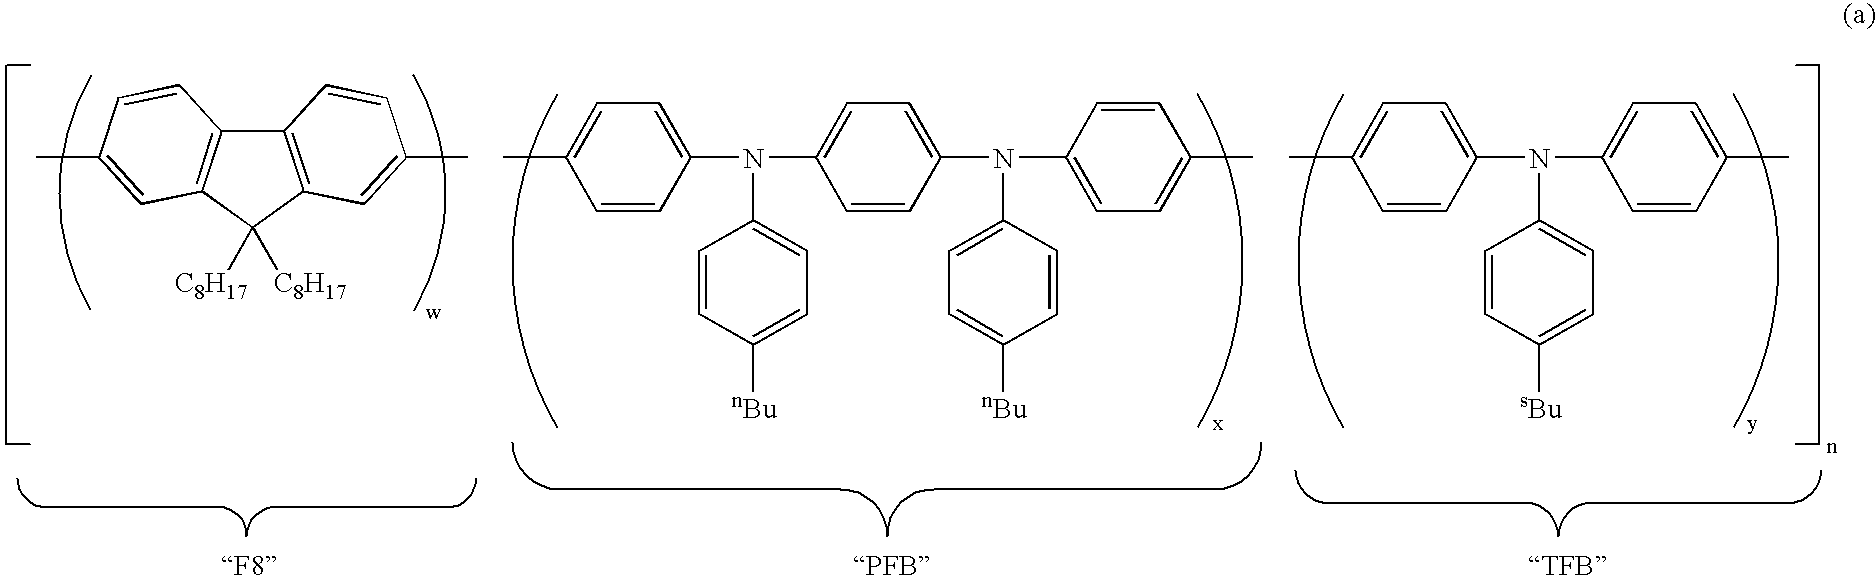 9-Aryl and bisayl substituted polyfluorenes